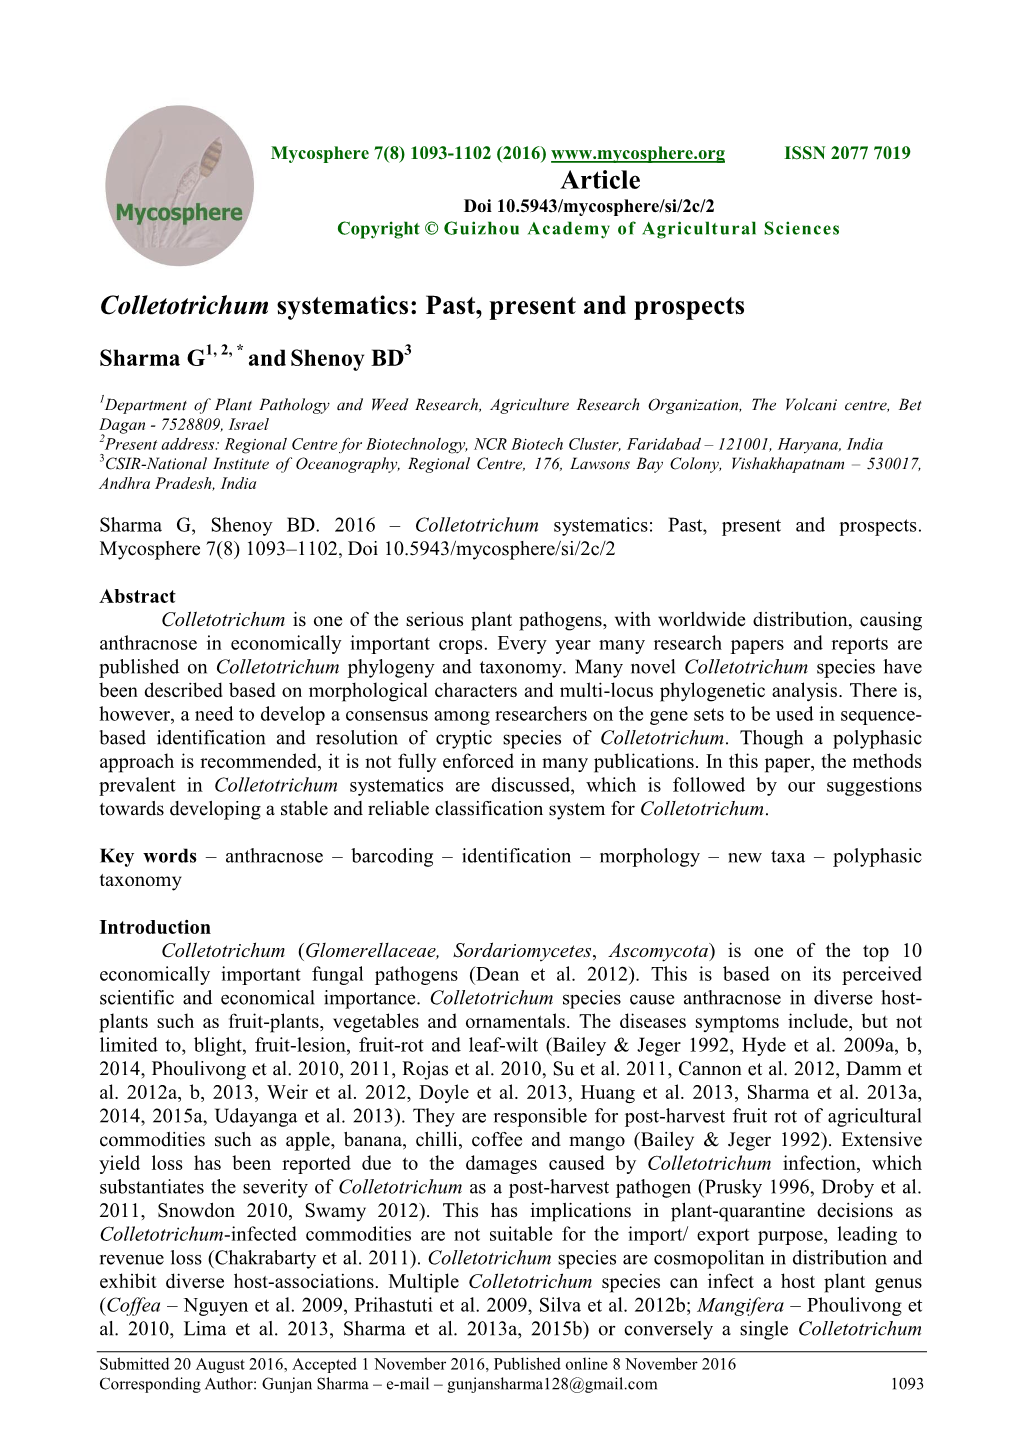 Colletotrichum Systematics: Past, Present and Prospects